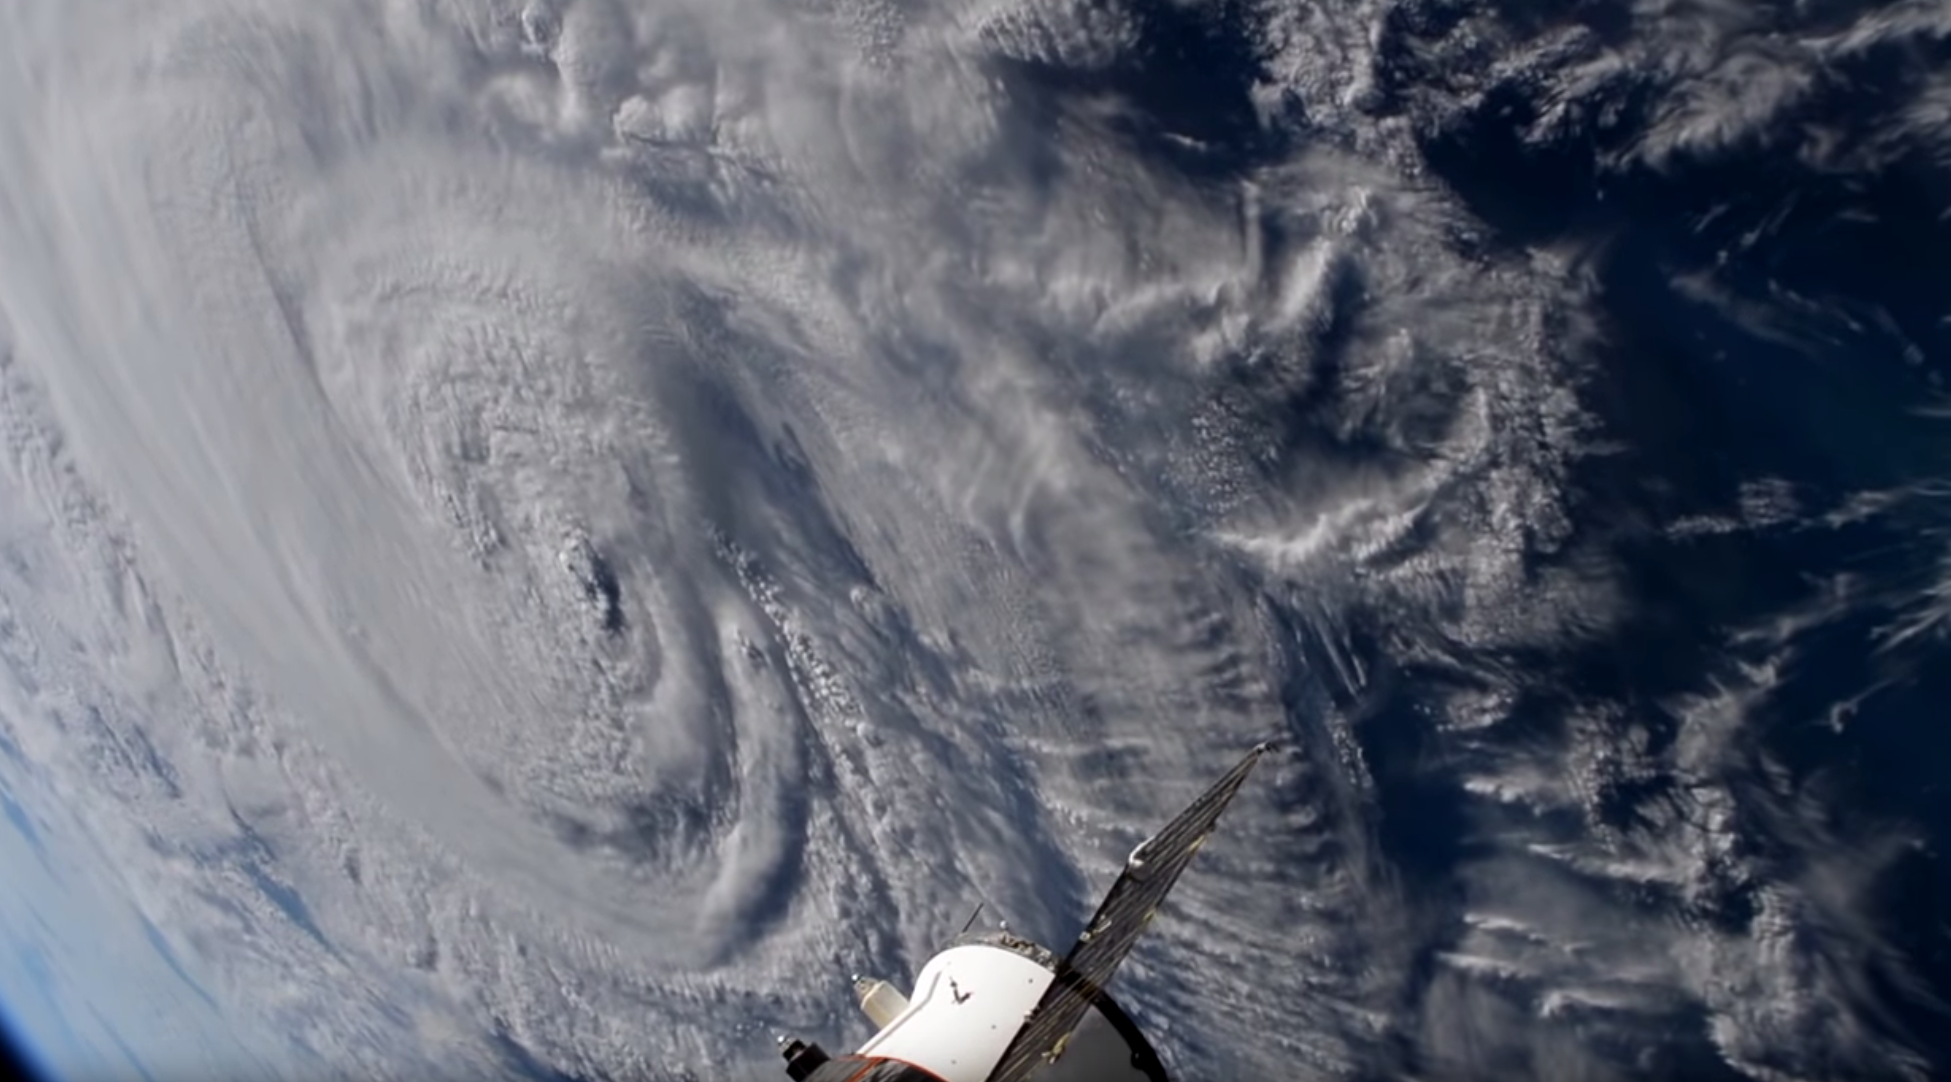 Cameras outside the International Space Station captured views of Hurricane Florence on Sept. 14 at 7:41 a.m. EDT minutes after the storm made landfall near Wrightsville Beach, North Carolina packing winds of 90 miles an hour. The National Hurricane Center said Florence is moving very slowly to the west at only 6 miles an hour, then is expected to turn to the southwest, increasing the threat for historic storm surge and catastrophic flooding to coastline areas and inland cities in North Carolina and South Carolina.